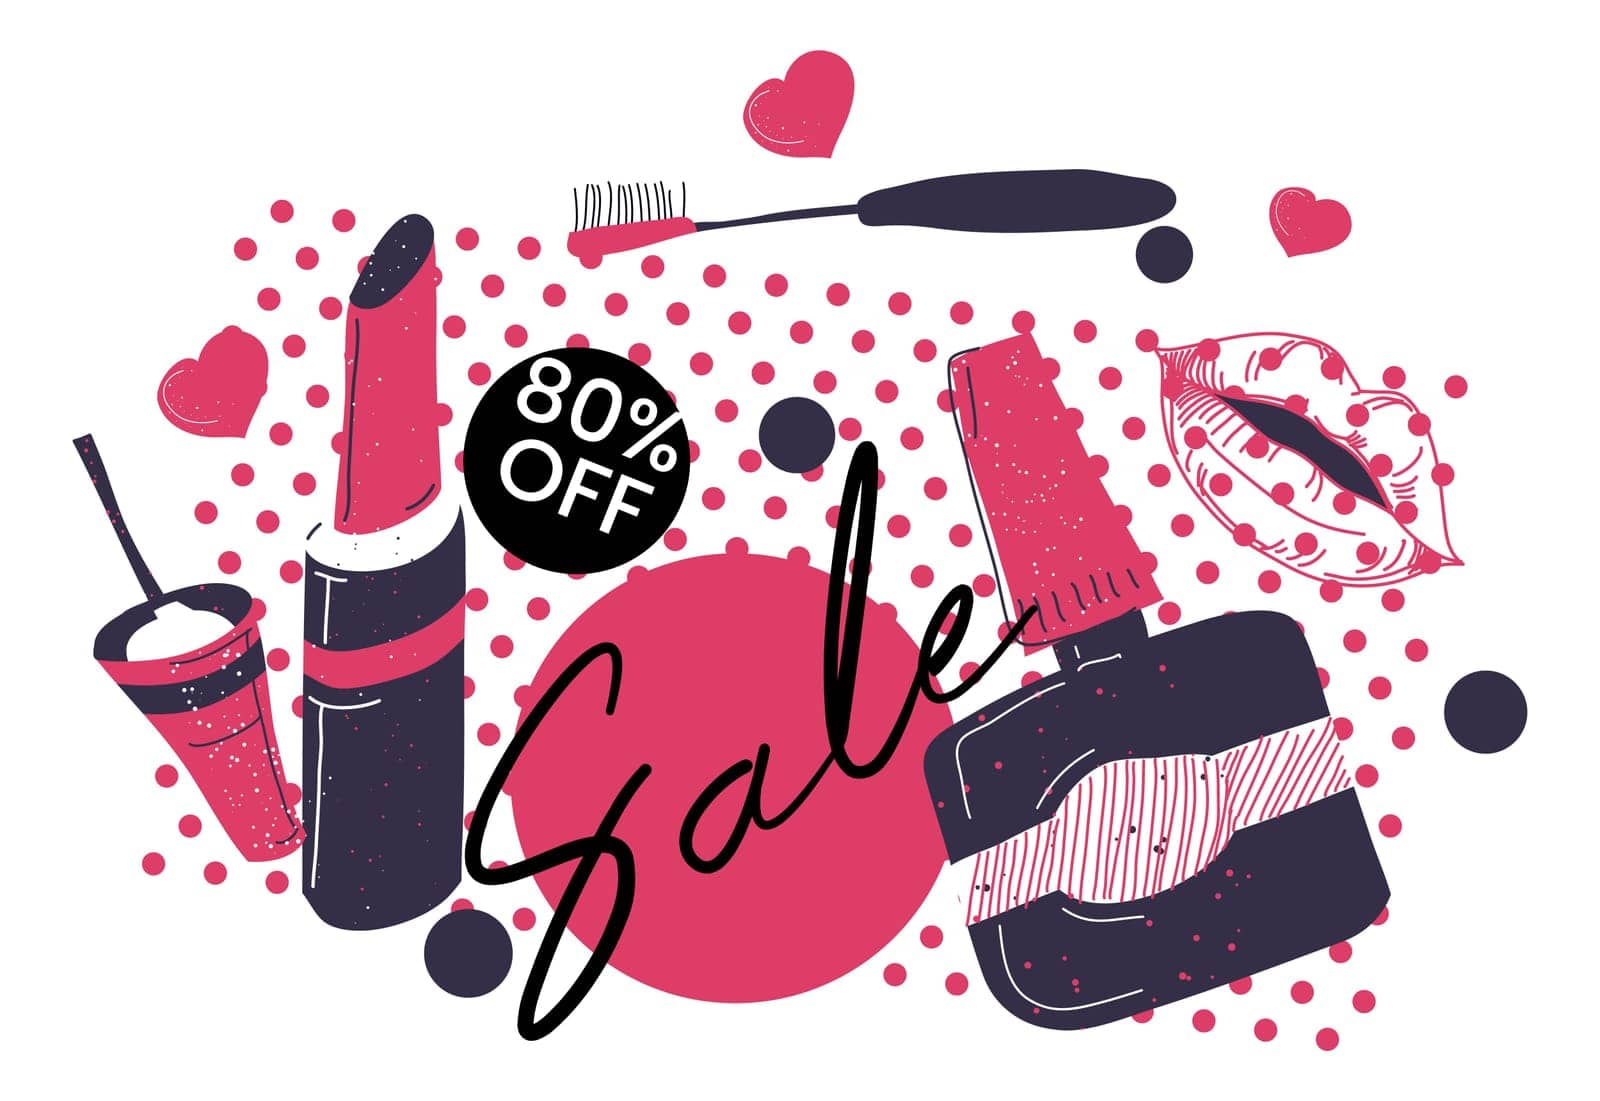 Beauty cosmetics sale and banners 80 off price by Sonulkaster